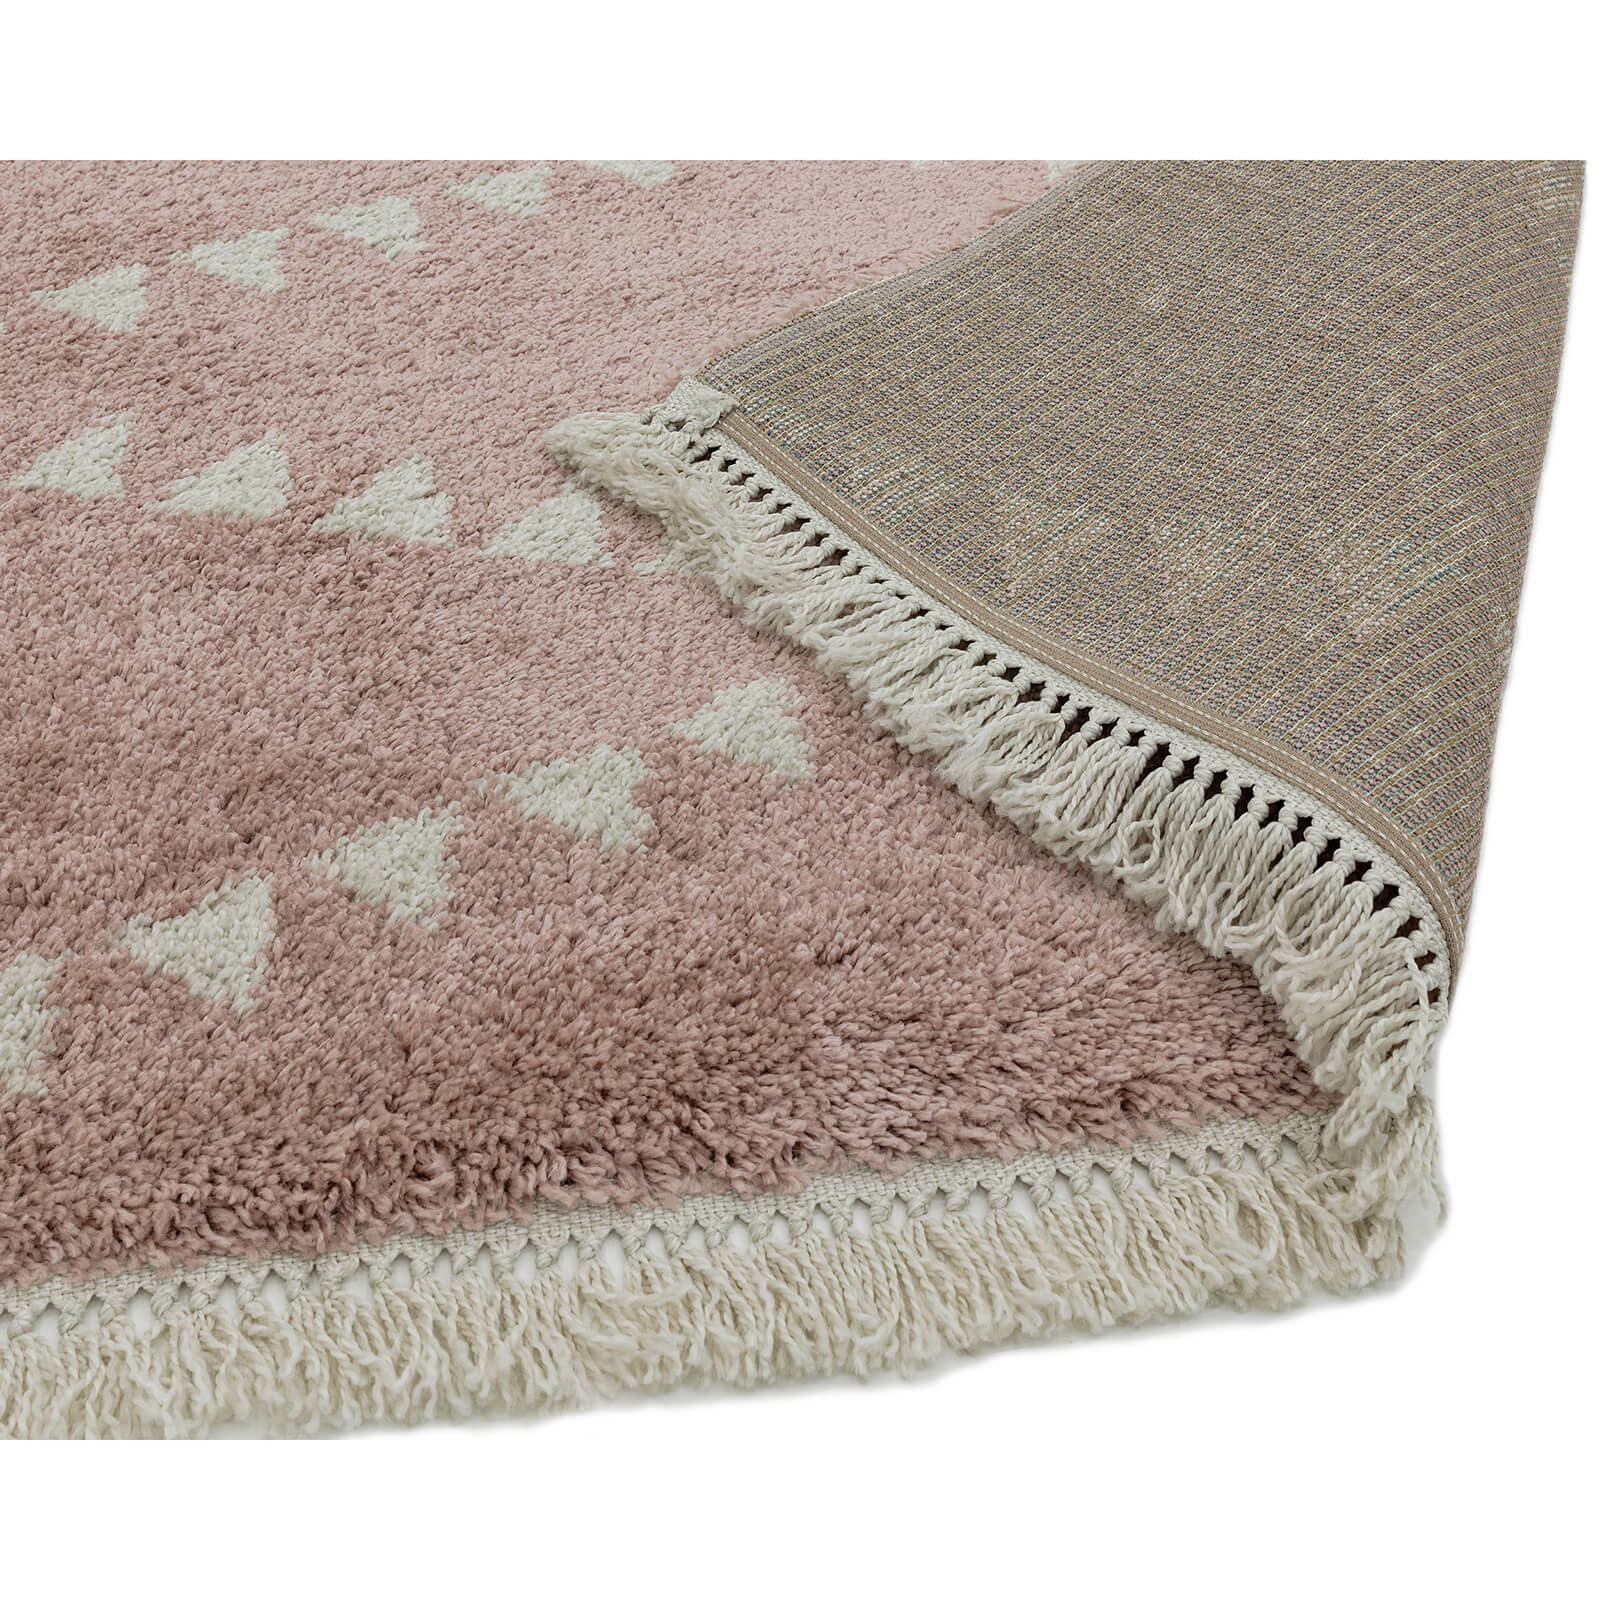 Asiatic Rocco RC01 Pink Rug